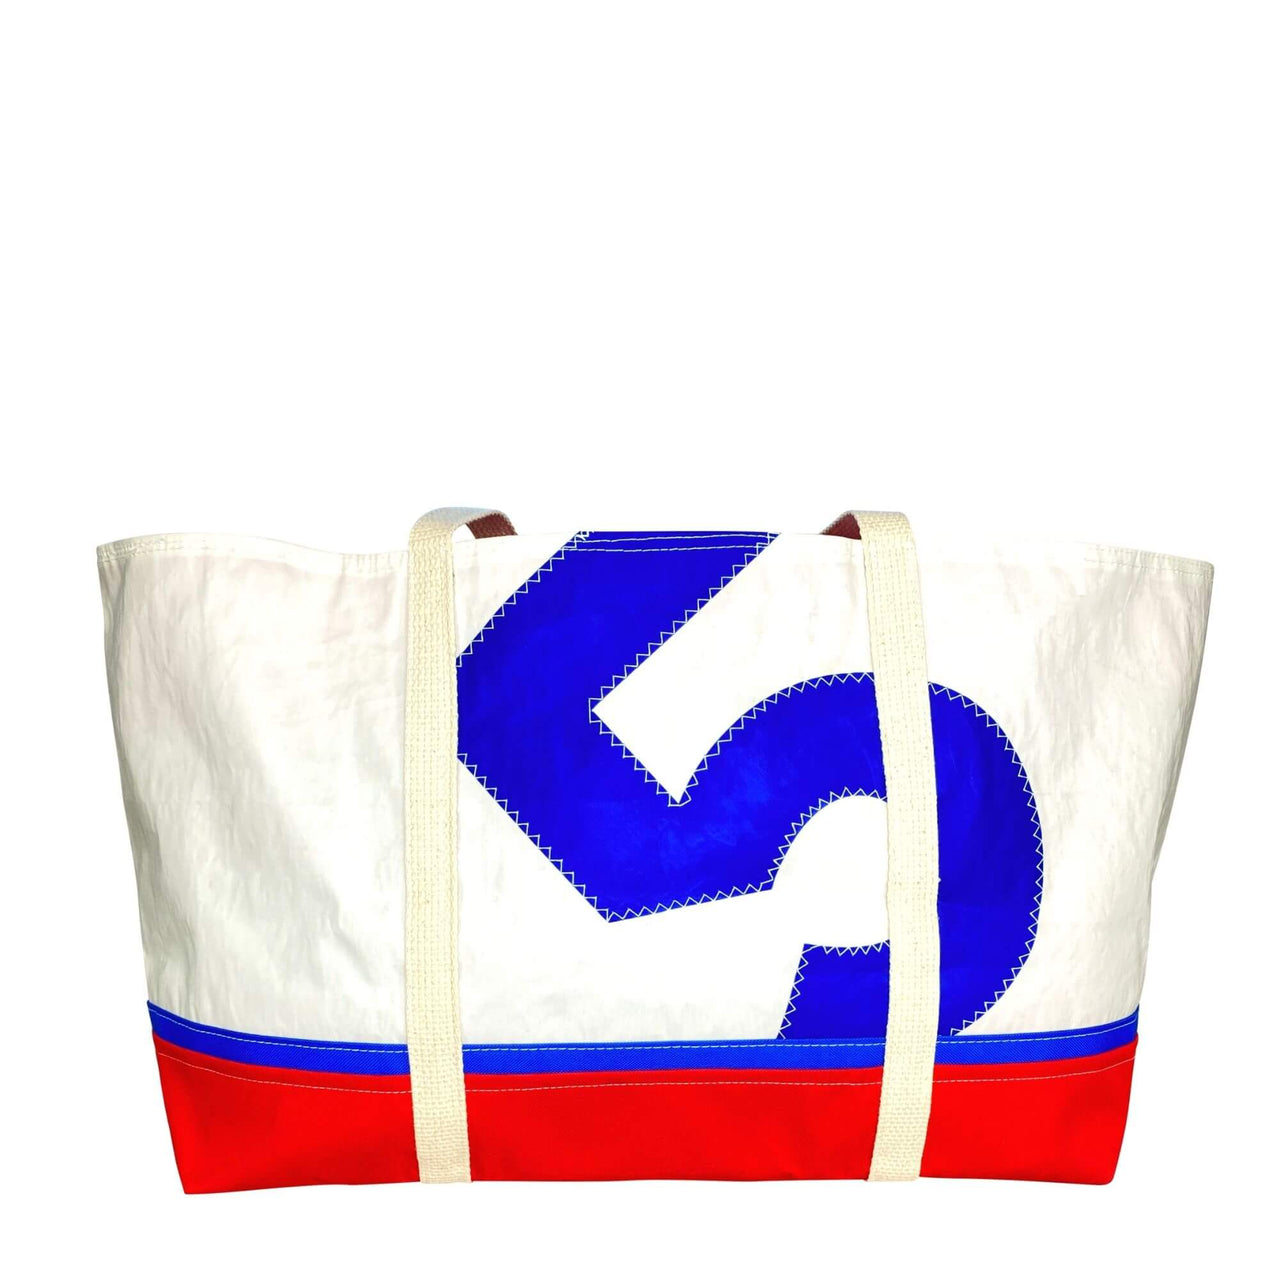 Recycled Sail Bag, Tote Bag Handmade from Sails, Blue & Red Handbags New England Trading Co   